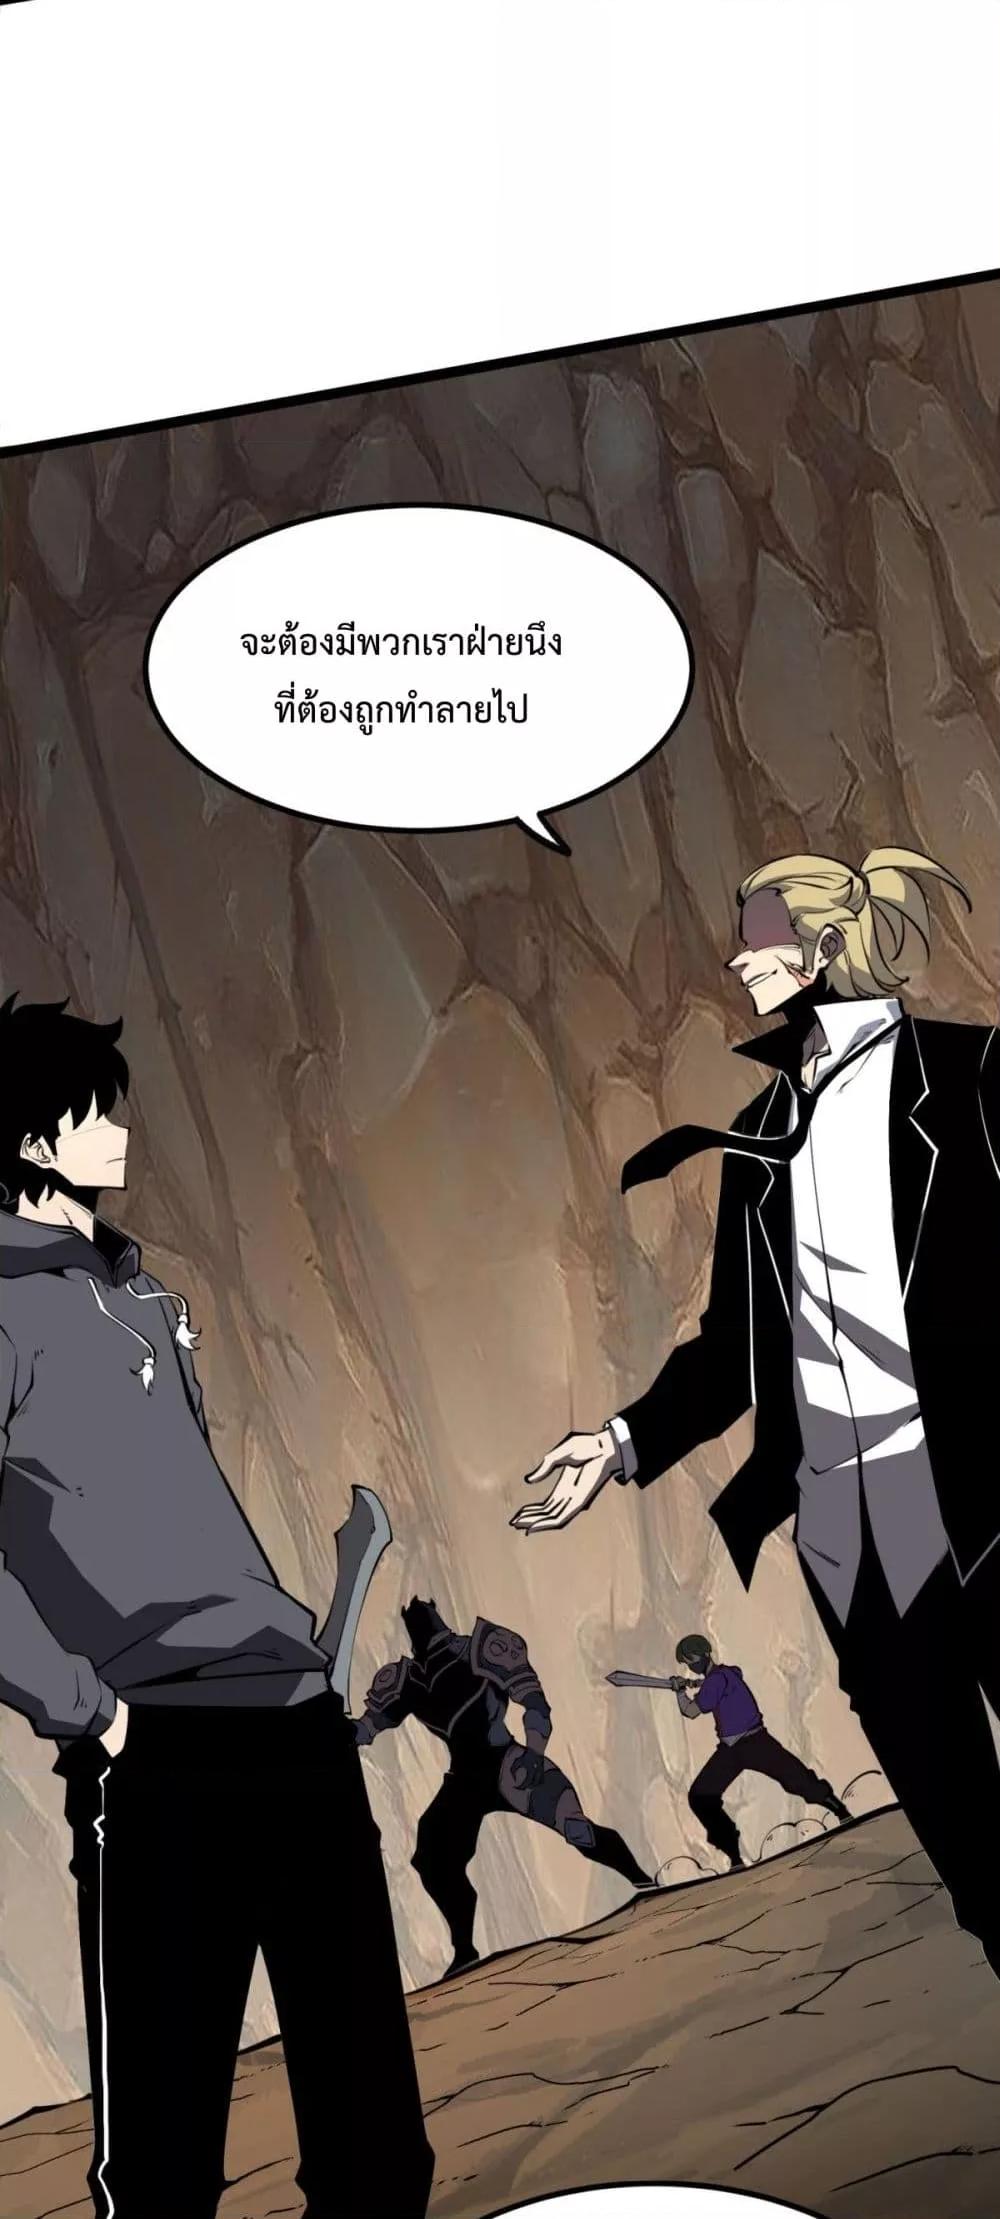 I Became The King by Scavenging โ€“ เนเธเนเธฅเน เน€เธฅเน€เธงเนเธฅเธฅเธฃเธดเนเธ เธ•เธญเธเธ—เธตเน 17 (41)